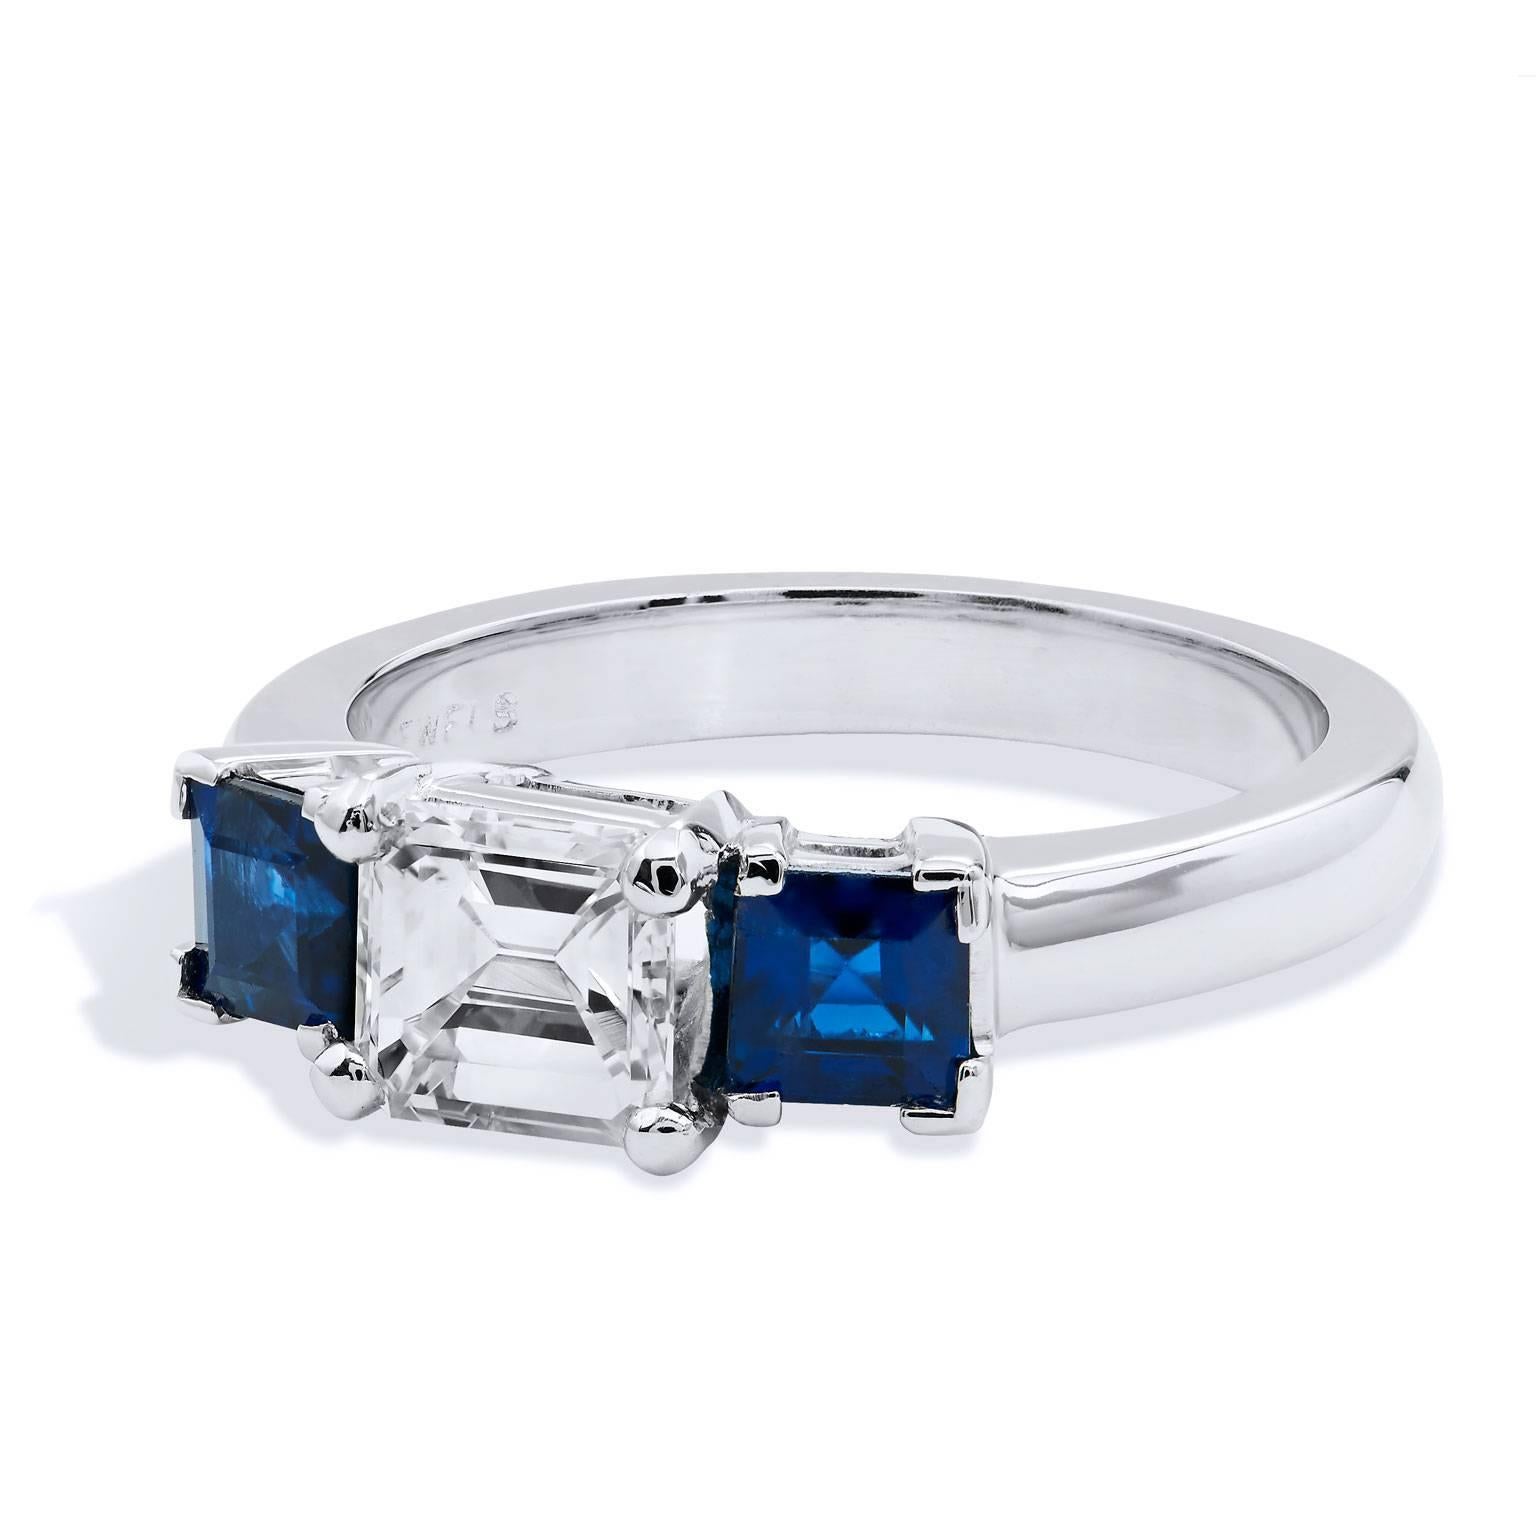 Handmade Three Stone Diamond and Sapphire 18 karat Gold Ring by H&H Jewels  

Refined and classic and minimal in design, this spectacular 18 karat white gold ring has a 0.80 carat emerald cut diamond affixed at center with two 0.90 carat total